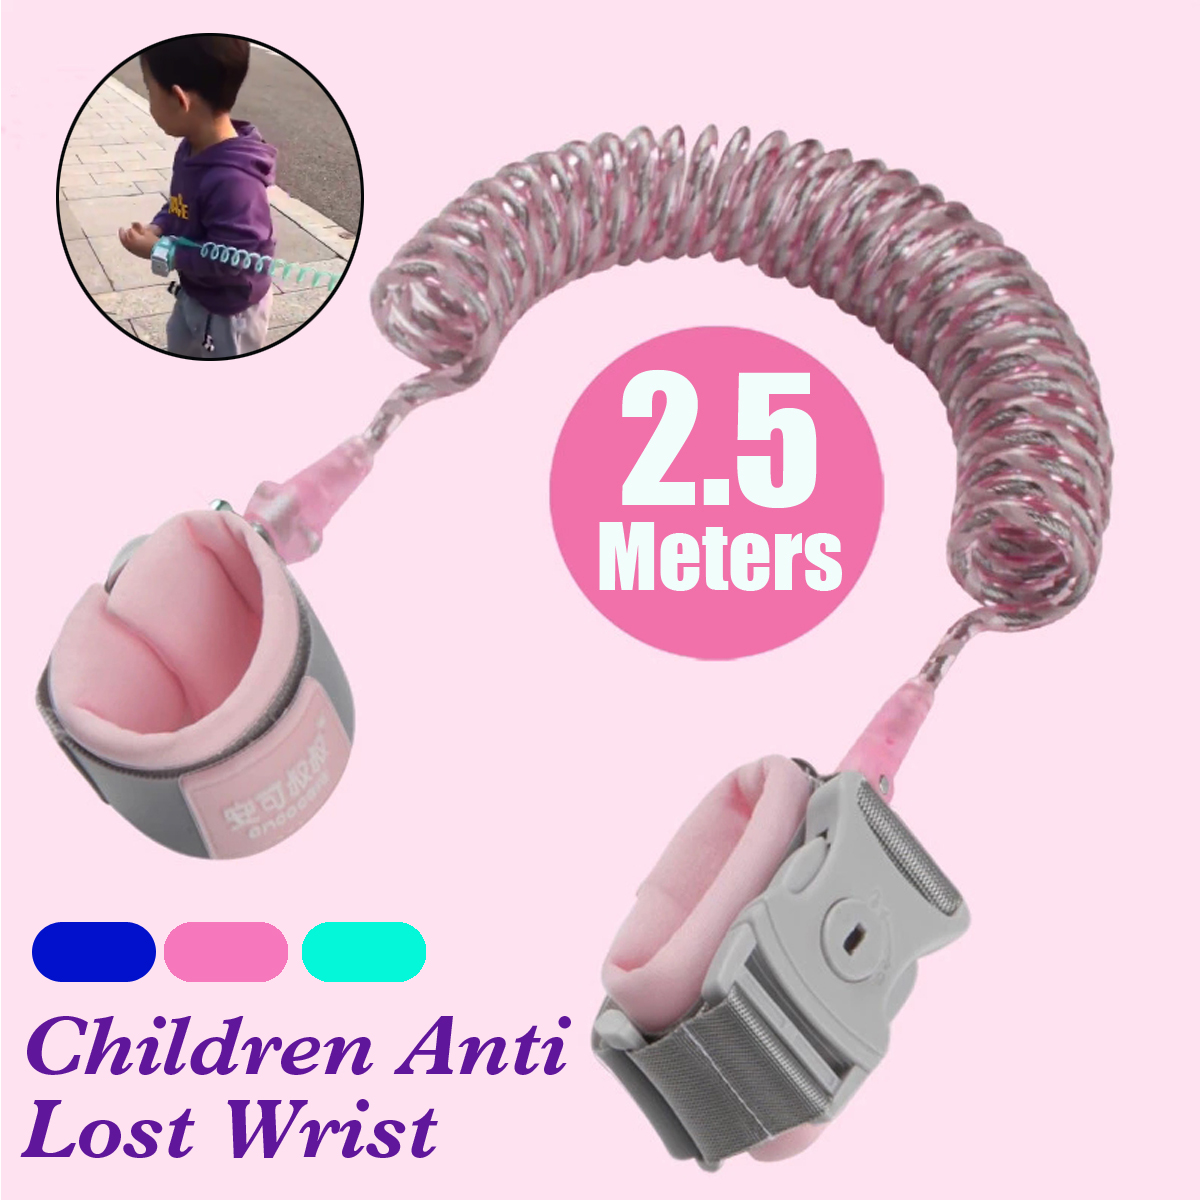 25m-Children-Anti-Lost-Wrist-Link-Safety-Harness-Adjustable-Traction-Rope-Toddler-Kids-Baby-Wristban-1815553-2